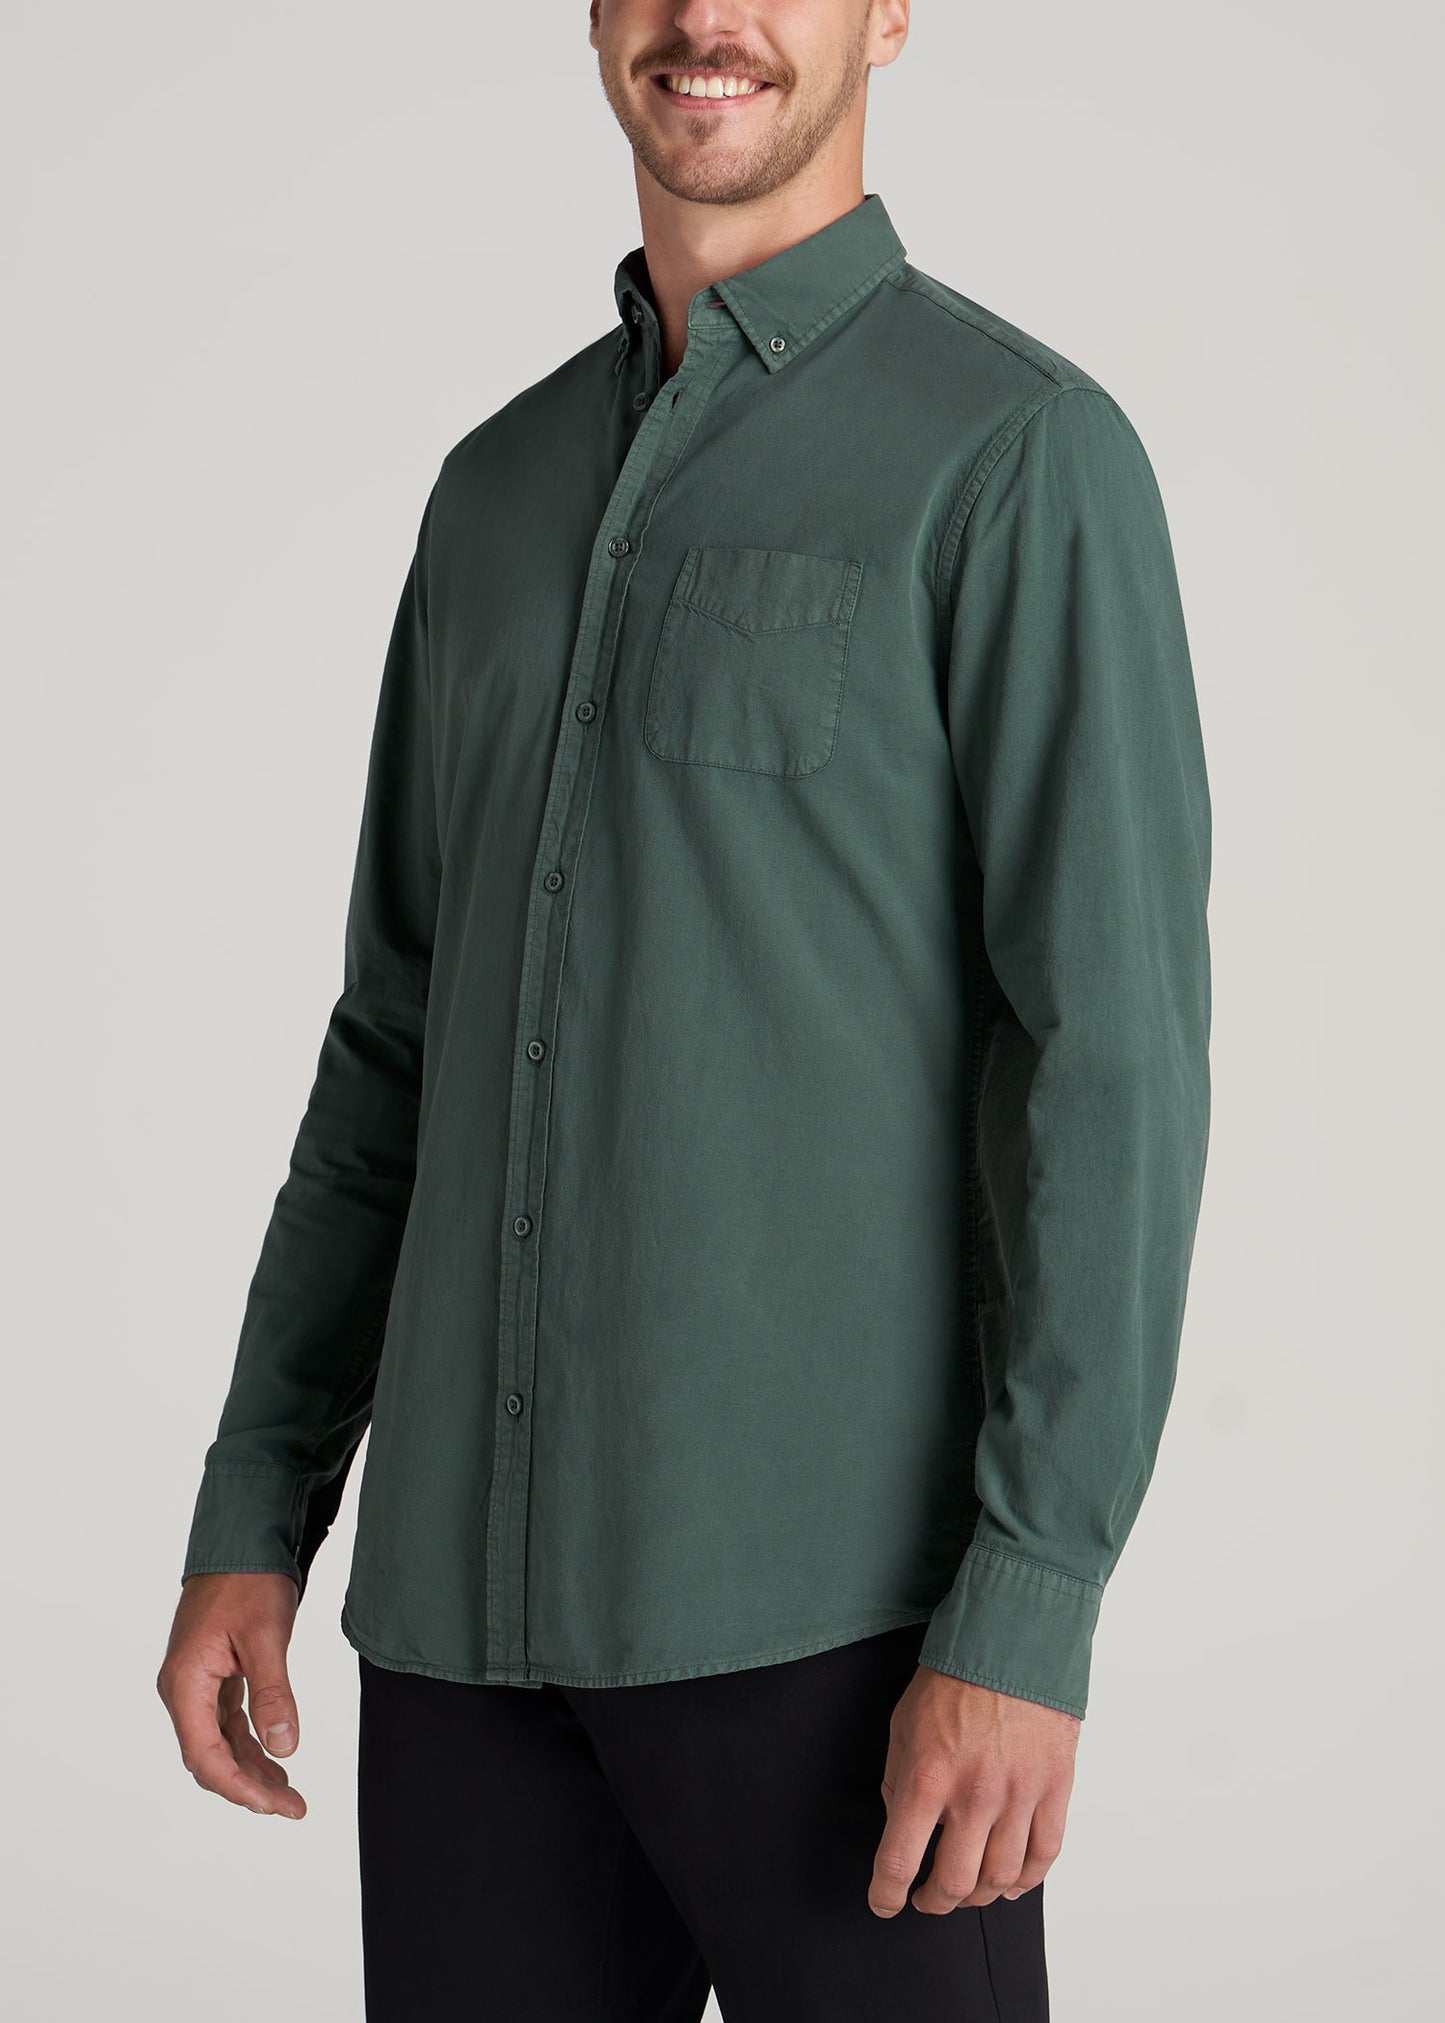     American-Tall-Men-Vintage-Wash-Oxford-Shirt-Timber-Green-side